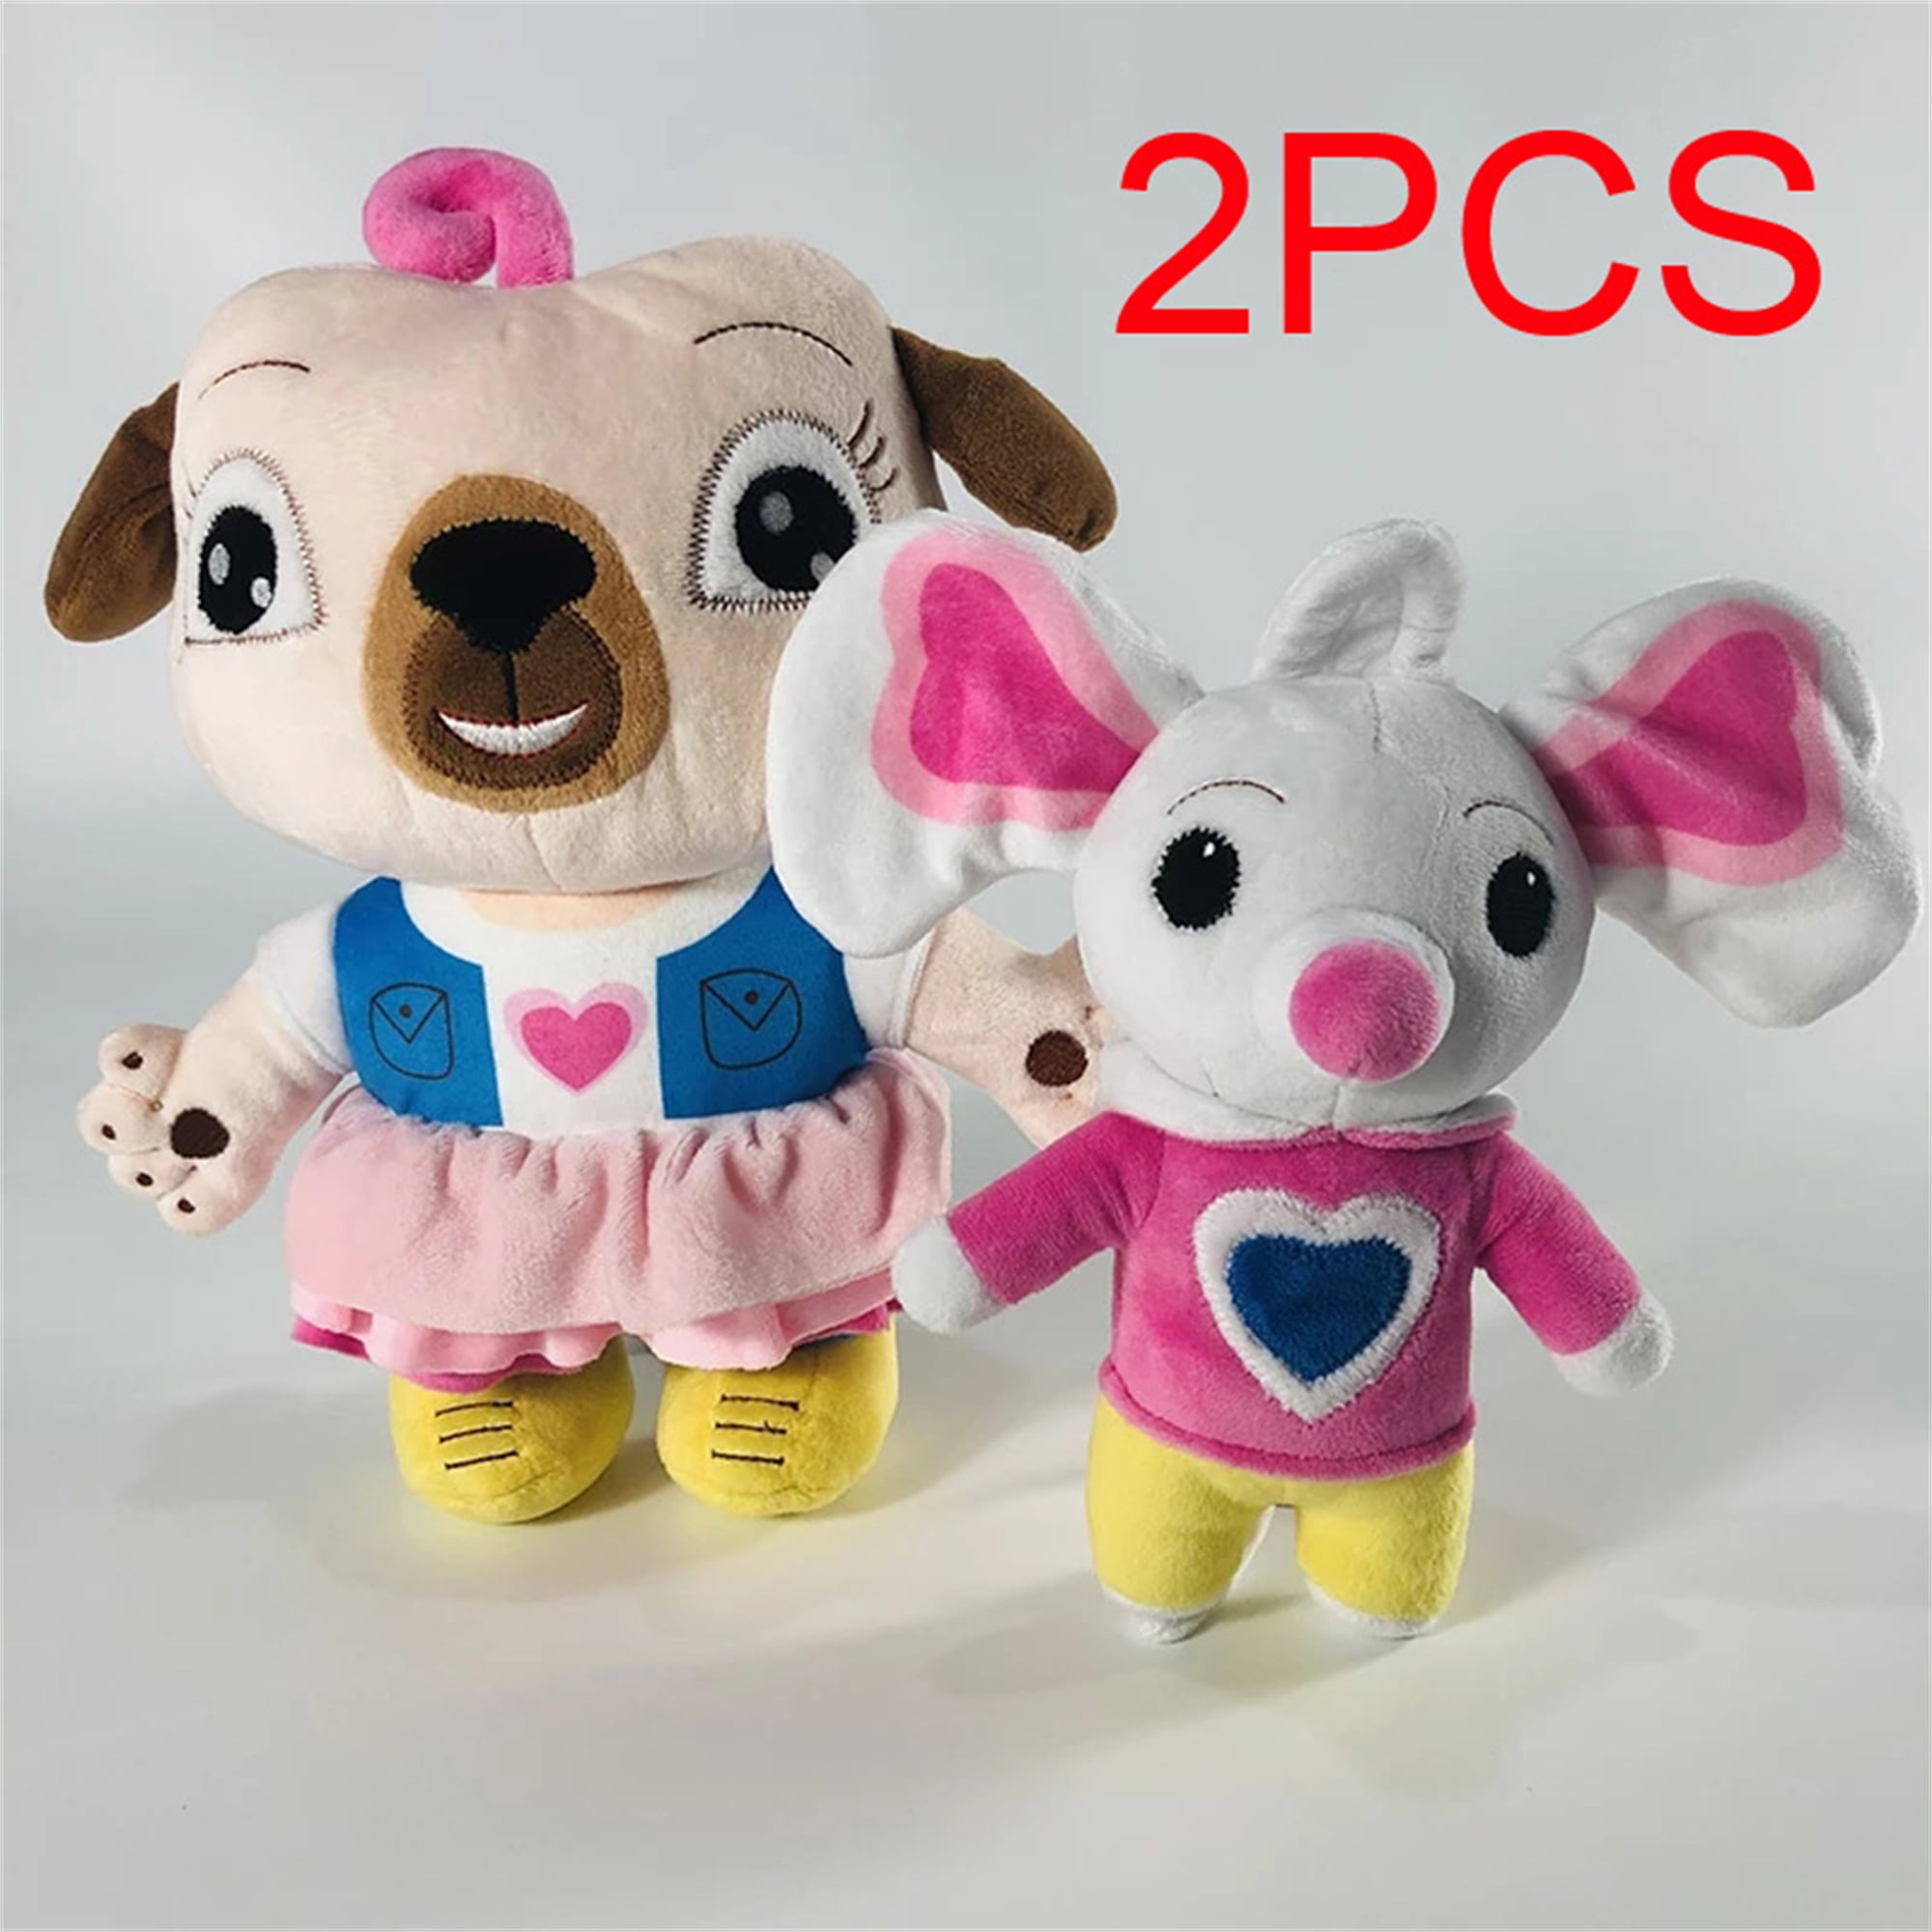 Chip & Potato Jumbo Chip the Cute Pug Puppy Plush Toy with Removable Plush  Potato the Mouse